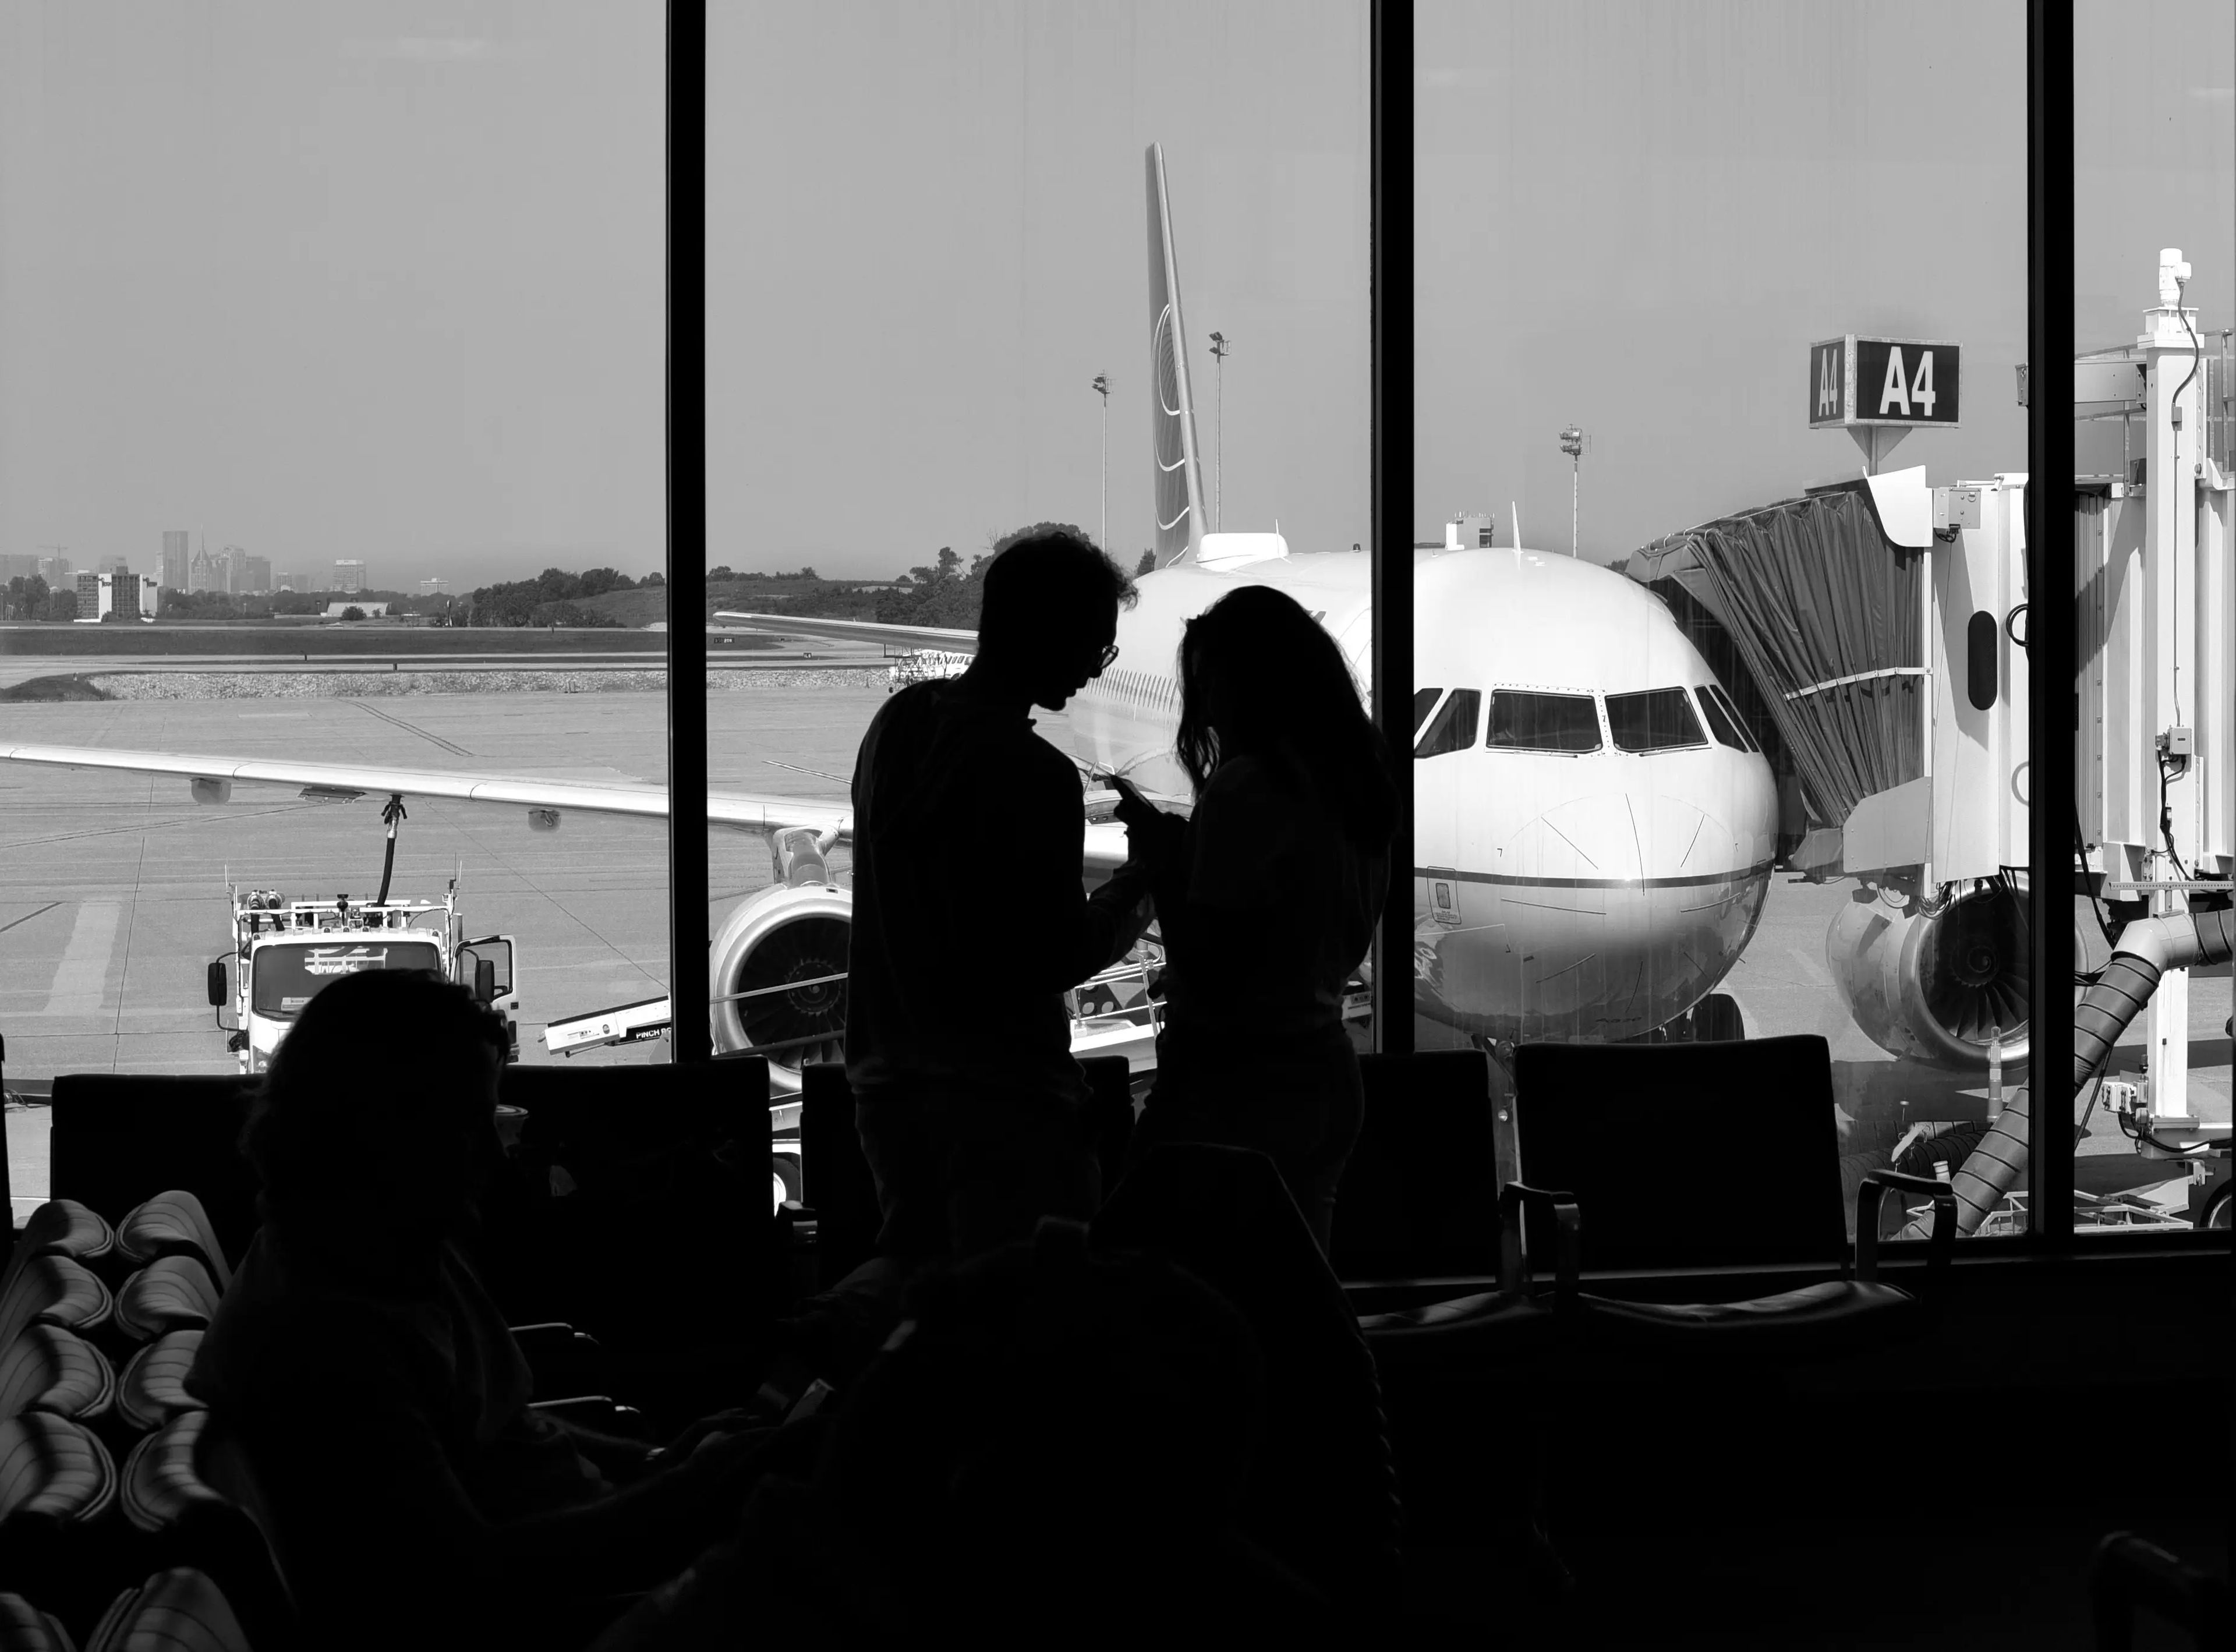 Two people standing in a boarding area.